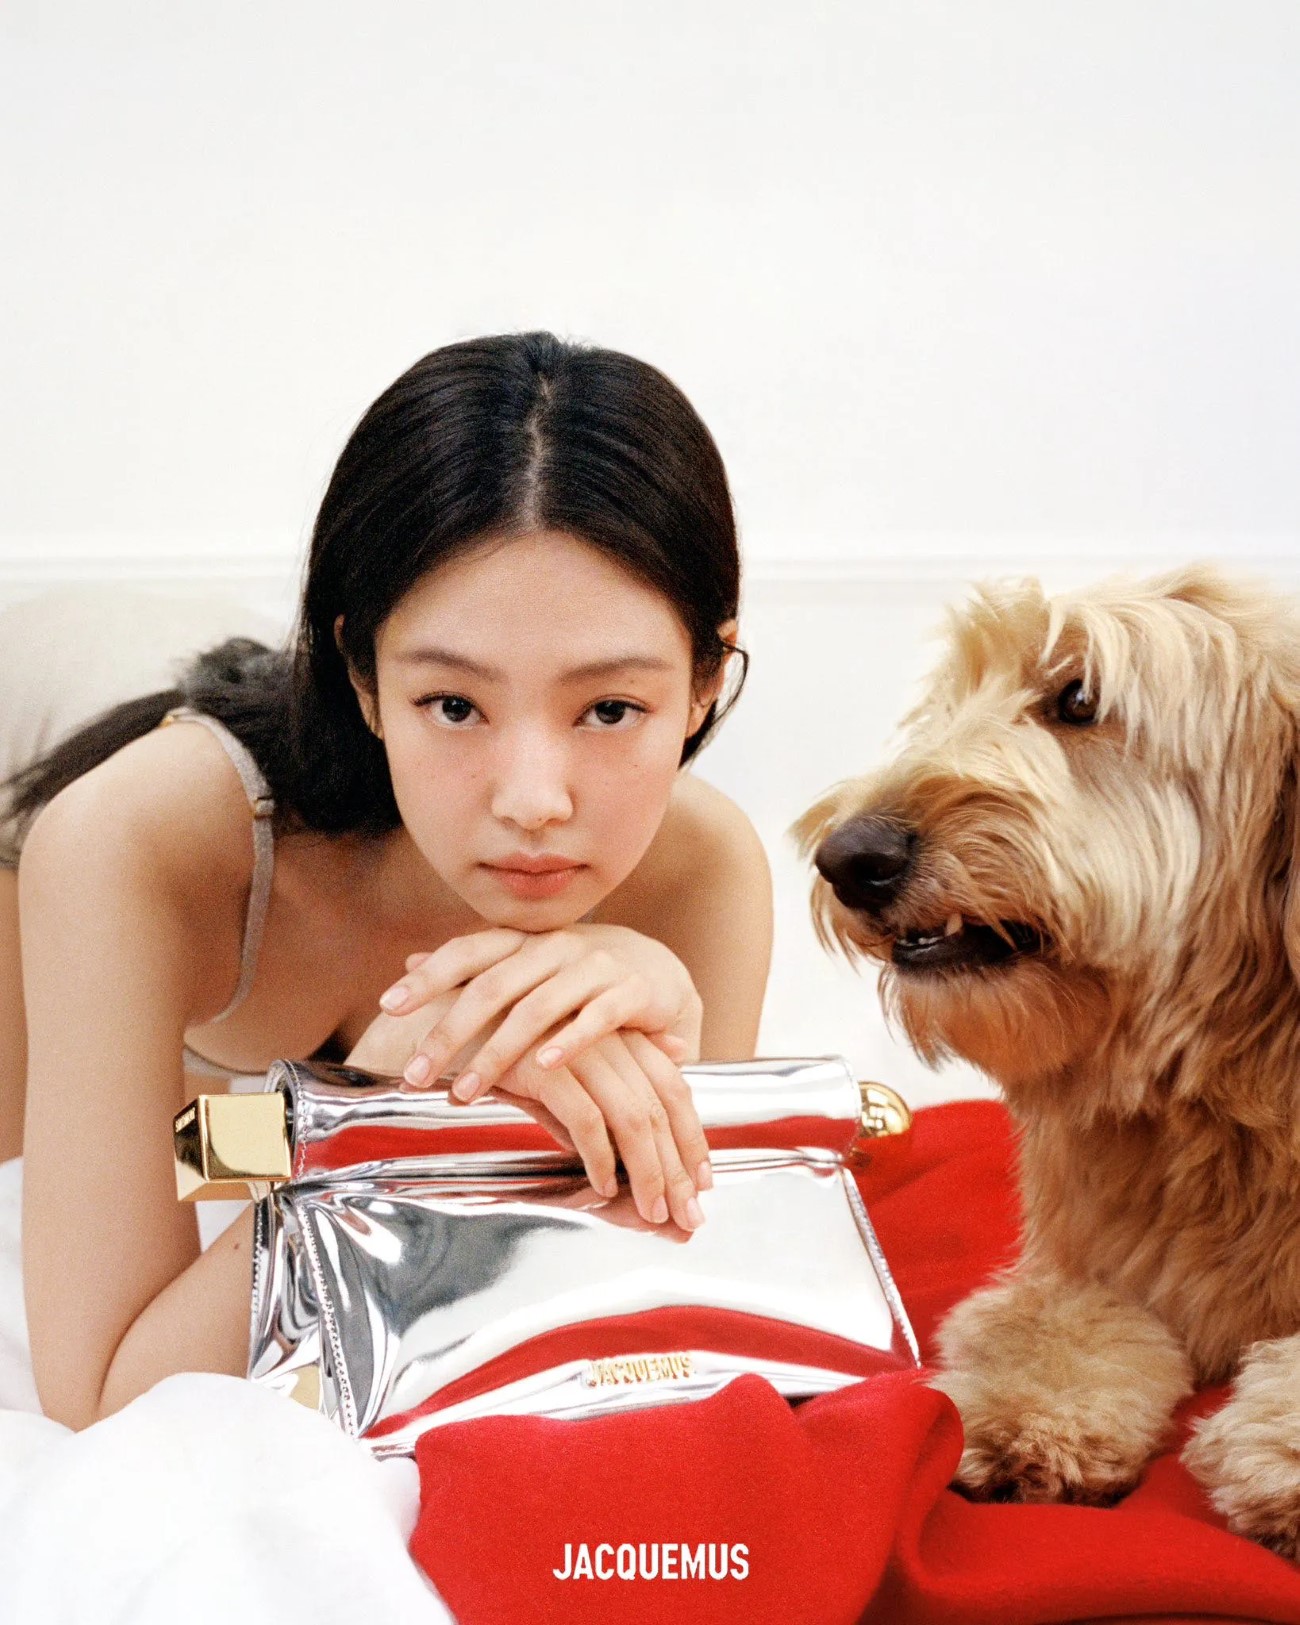 Blackpink's Jennie leads Jacquemus' "Guirlande" Holiday 2023 campaign